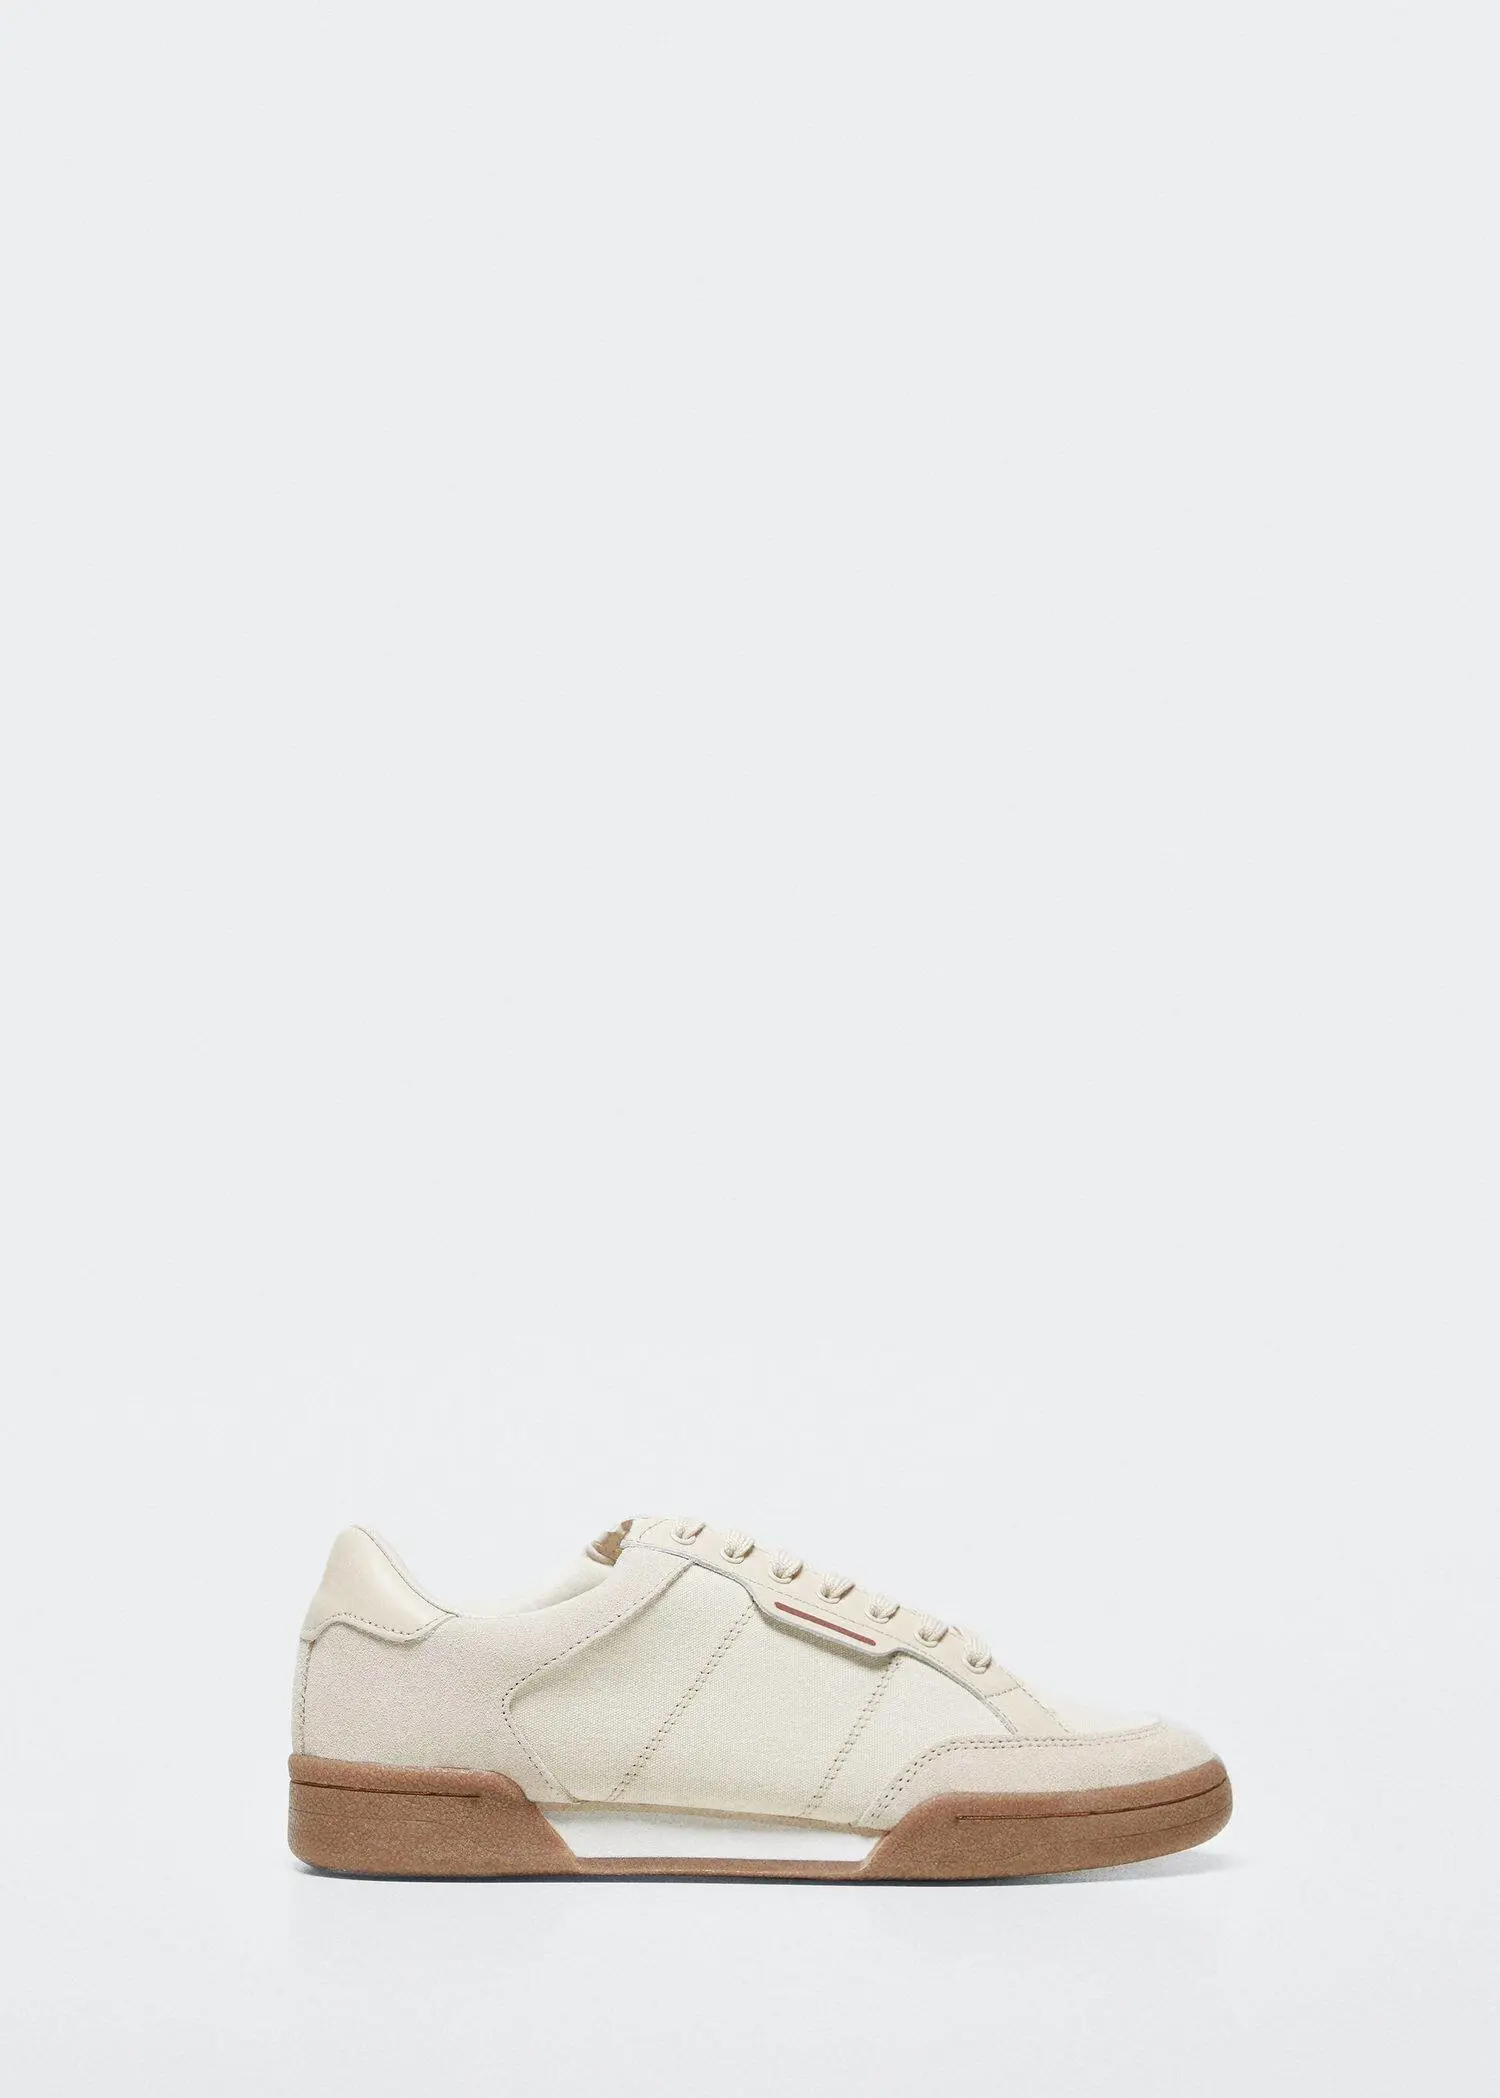 Mango Leather retro sneakers. a pair of white shoes on a white background. 